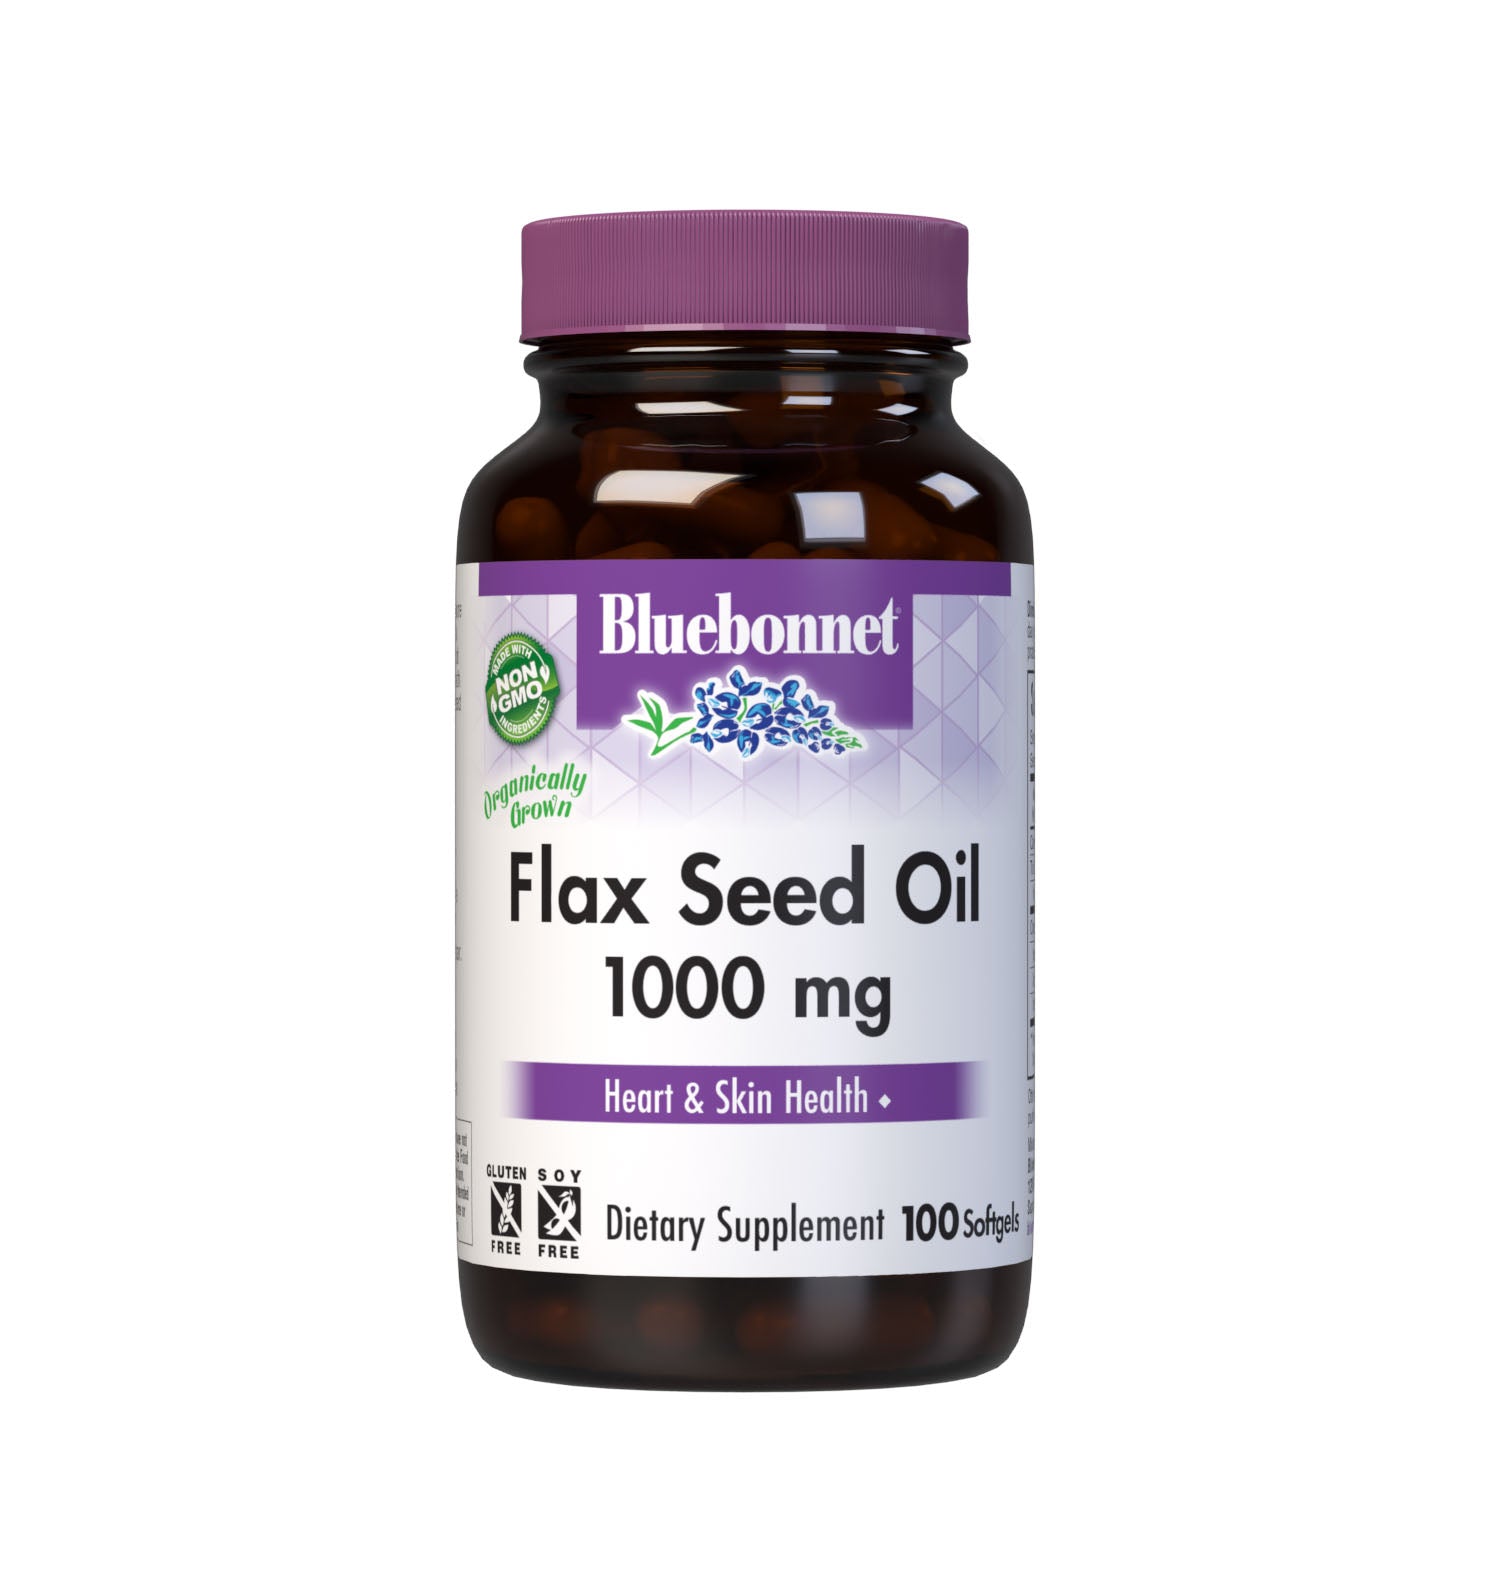 Bluebonnet’s Flax Seed Oil 1000 mg Softgels are formulated with certified organically grown flax seed, a known source of omega-3, omega-6and omega-9 fatty acids that help support cardiovascular health and the maintenance of healthy skin. Cold pressed without the use of chemical solvents.  #size_100 count